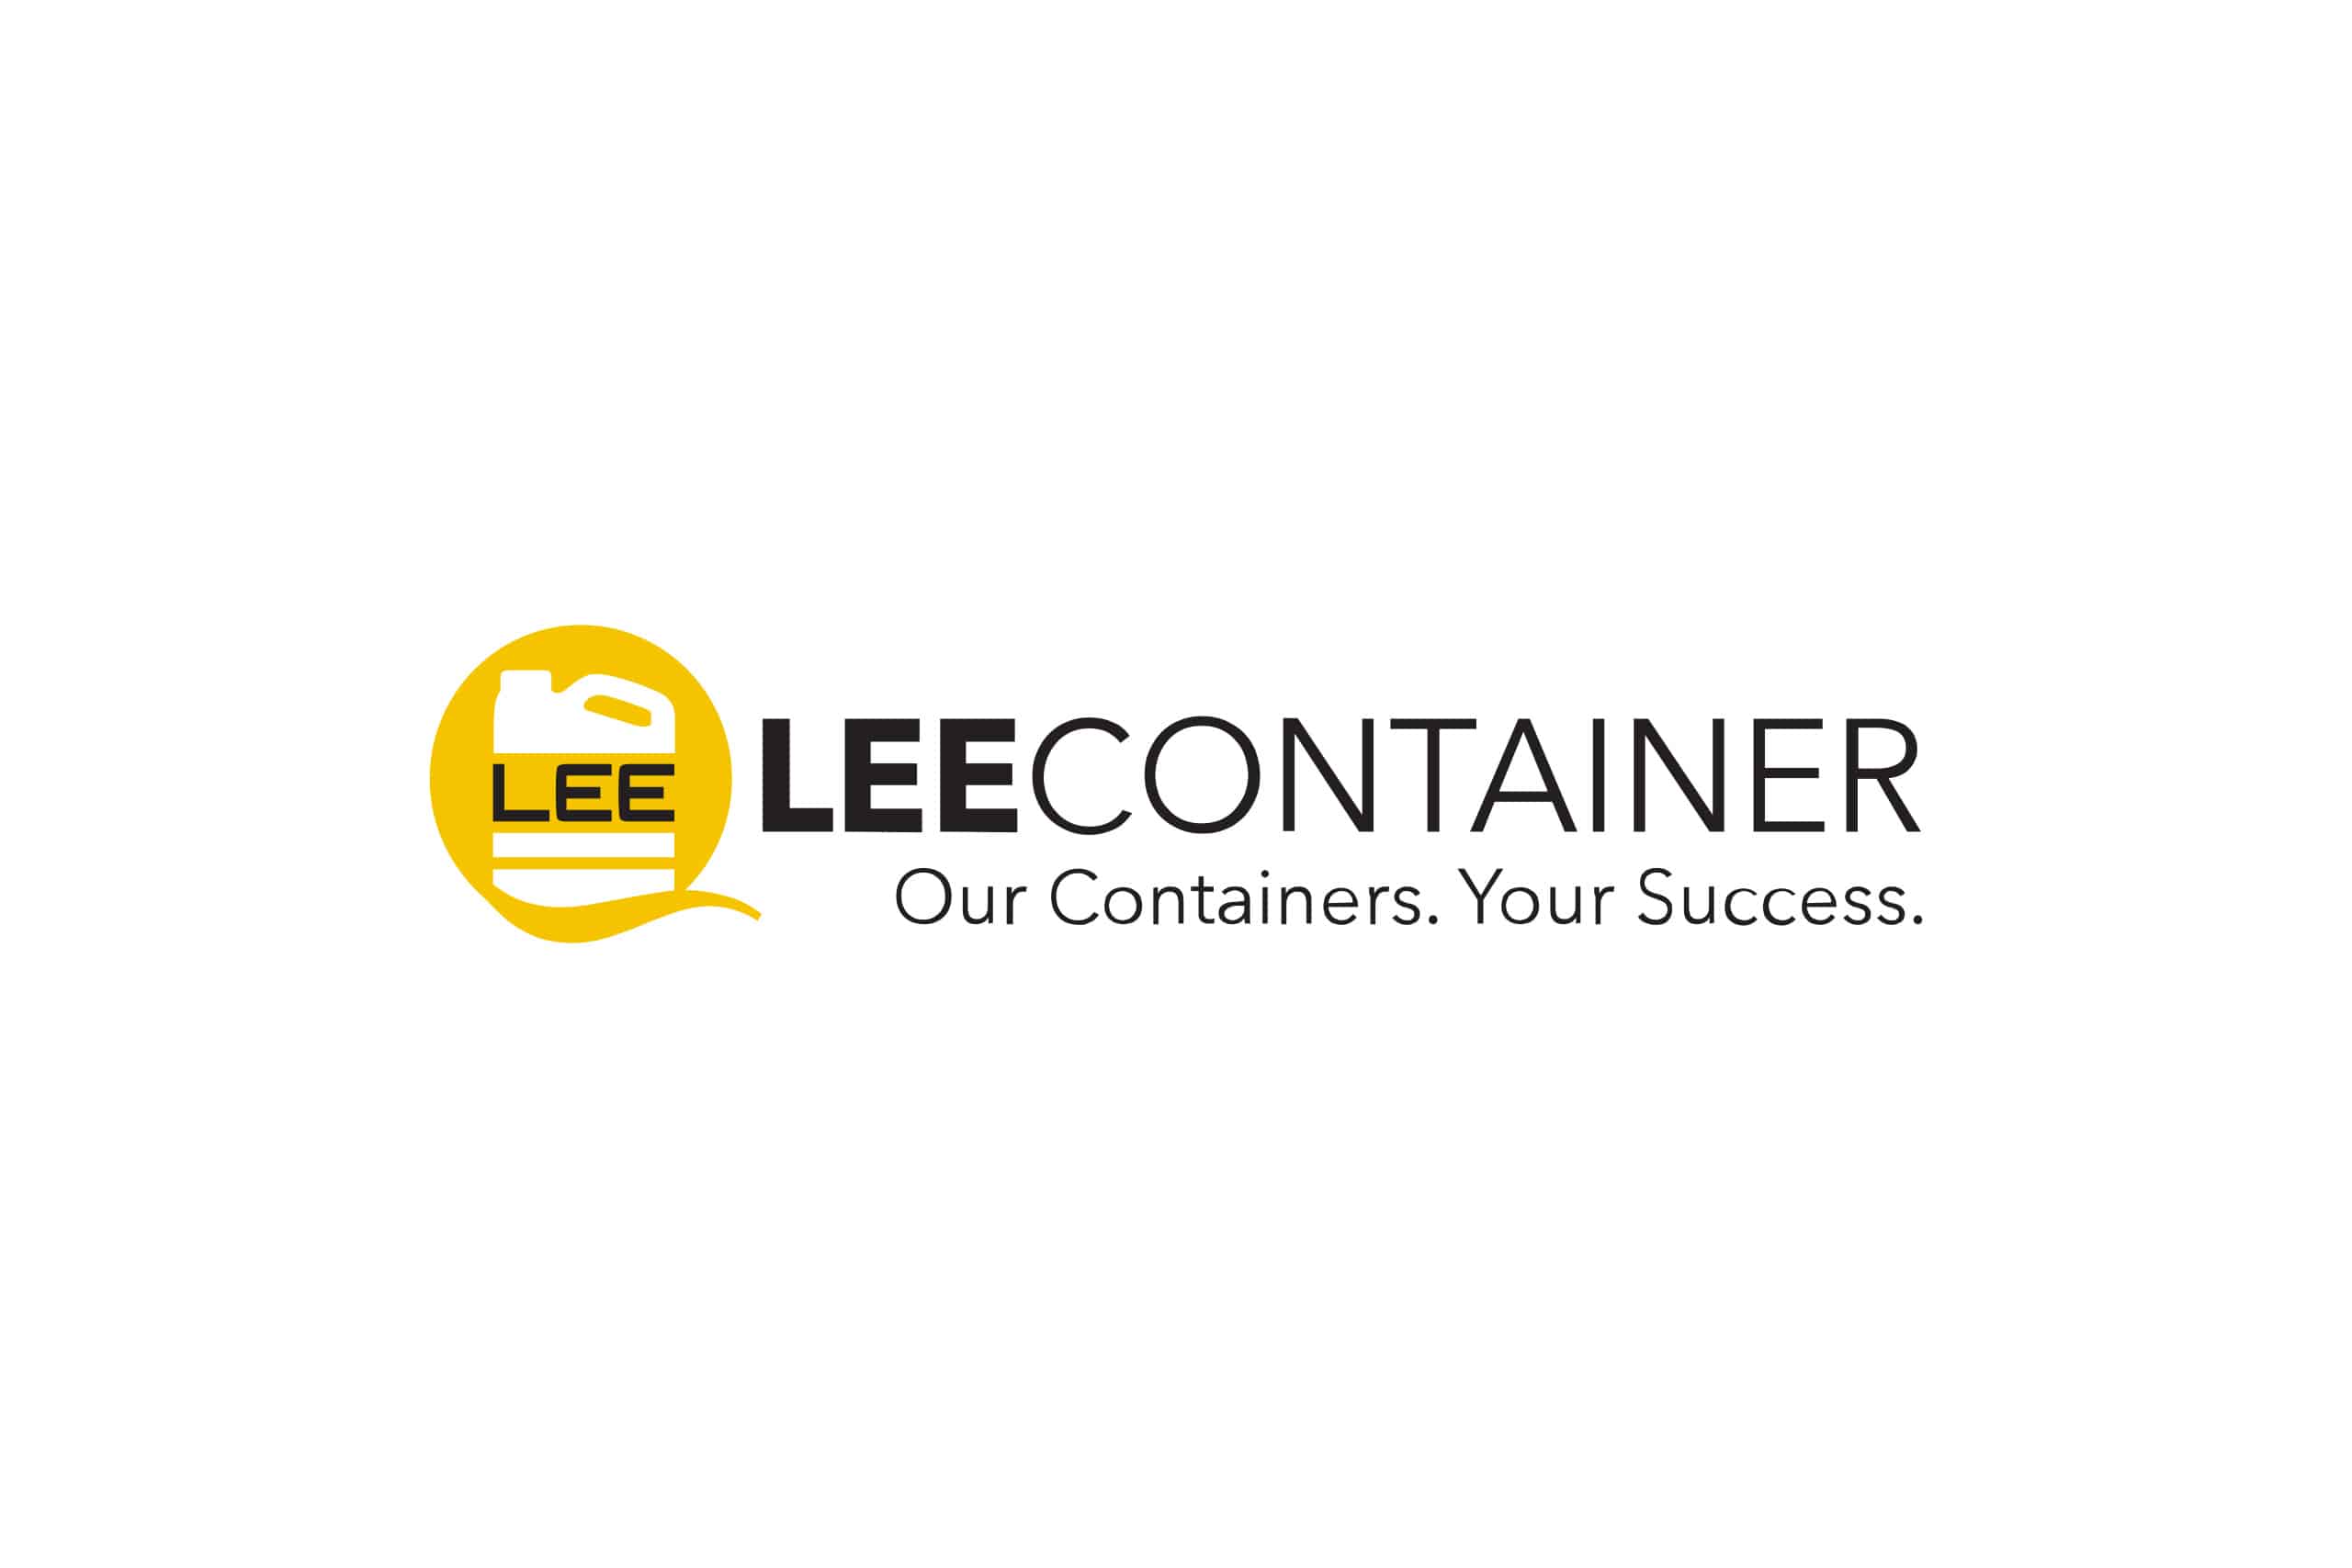 lee container logo